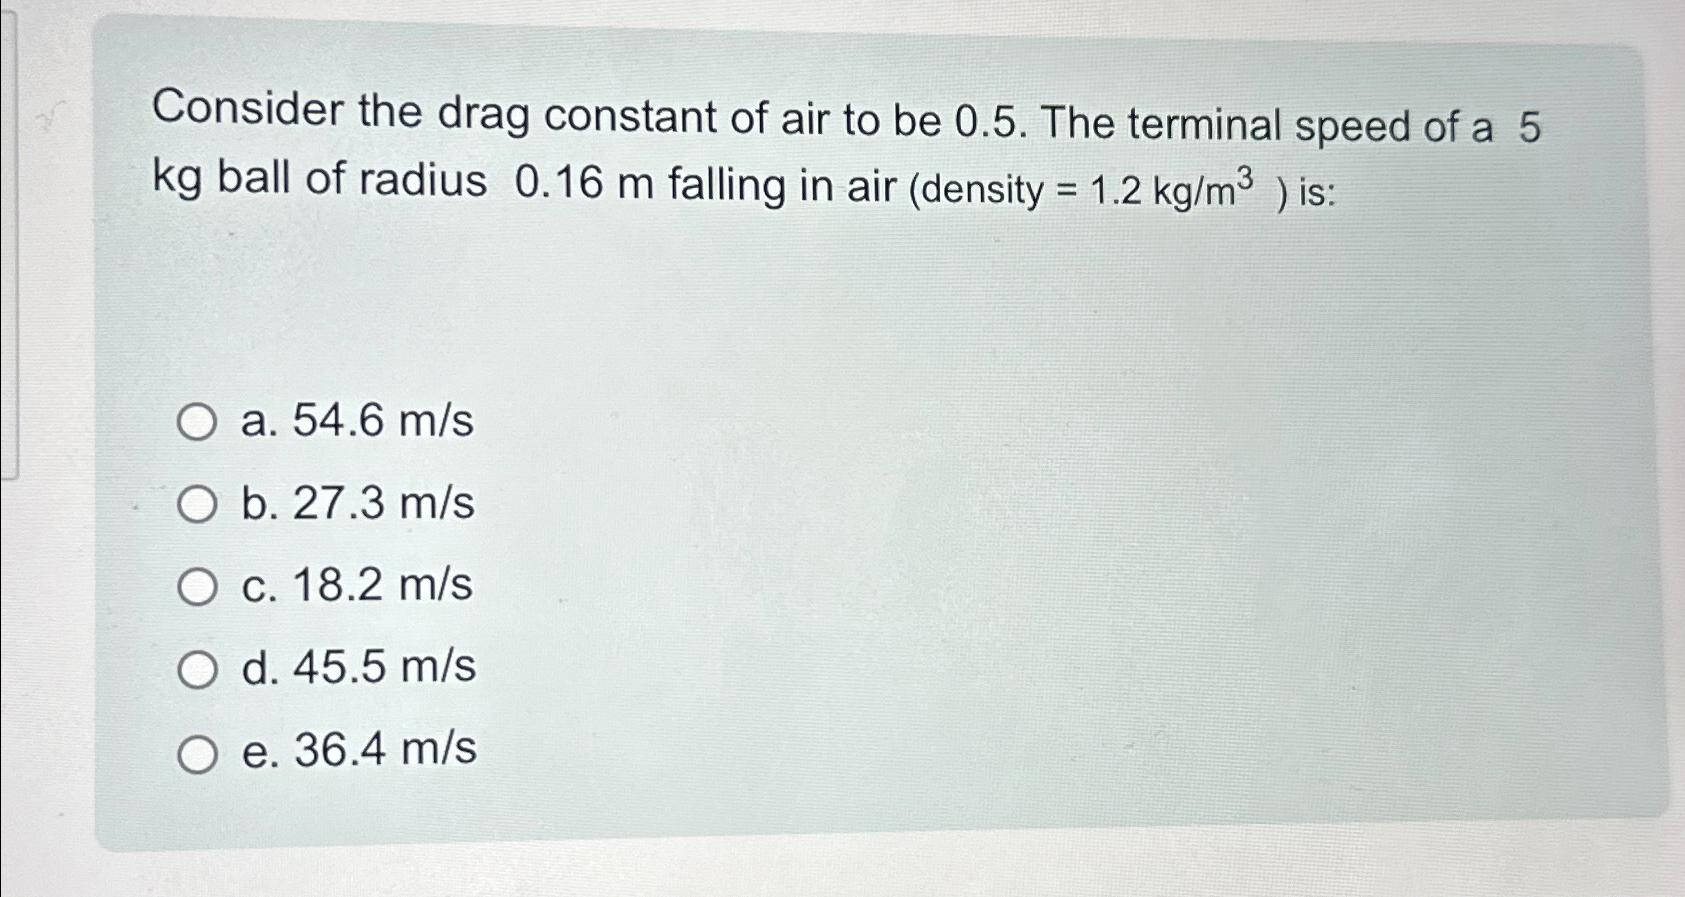 Consider the drag constant of air to be 0.5. The terminal speed of a 5 kg ball of radius 0.16 m falling in